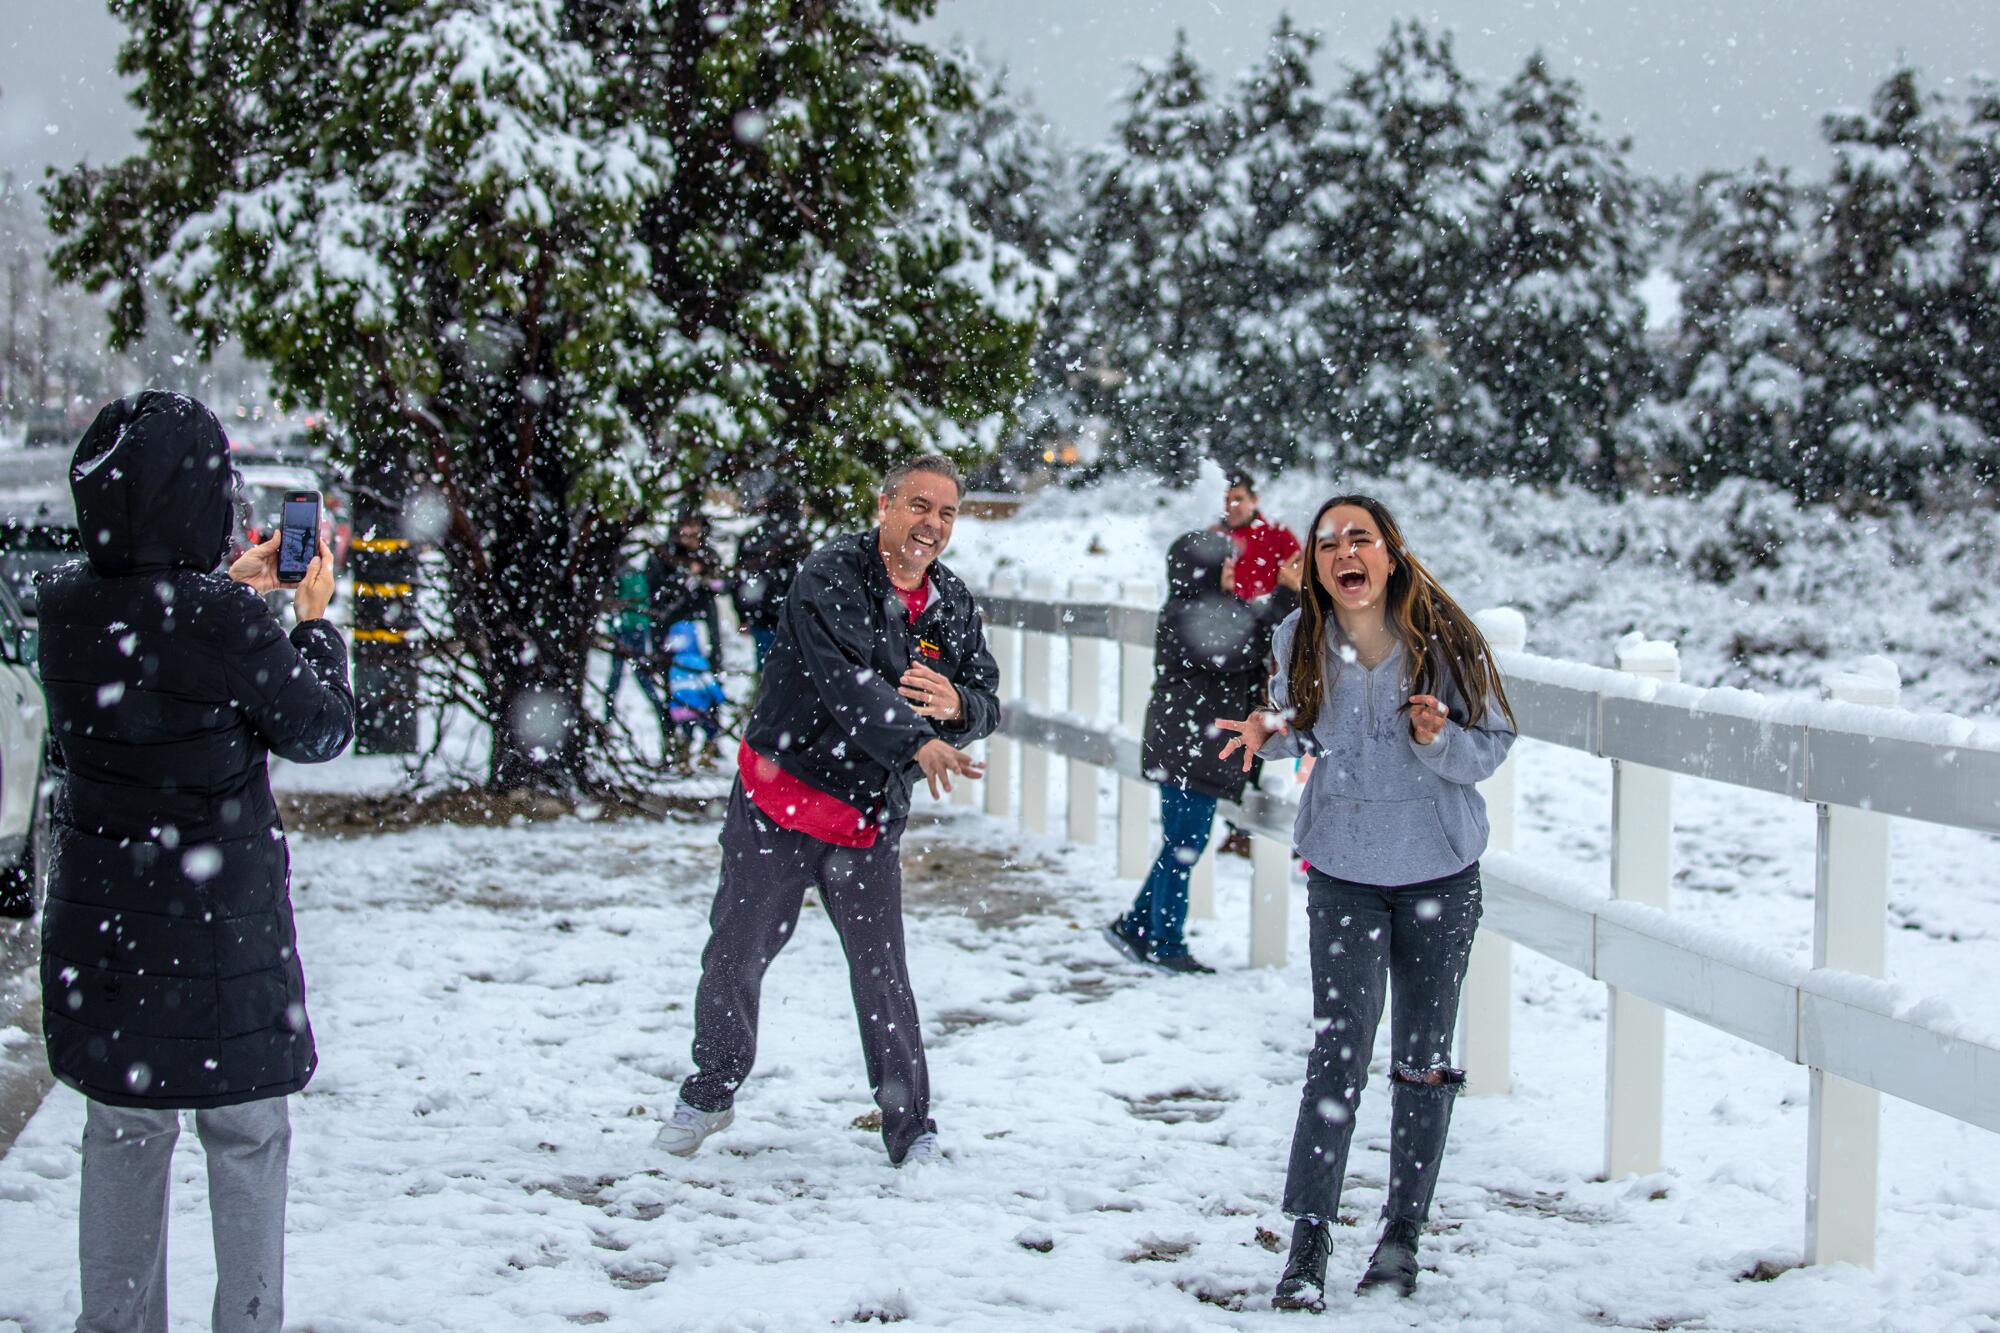 The Nelson family play in freshly fallen snow in Rancho Cucamonga.